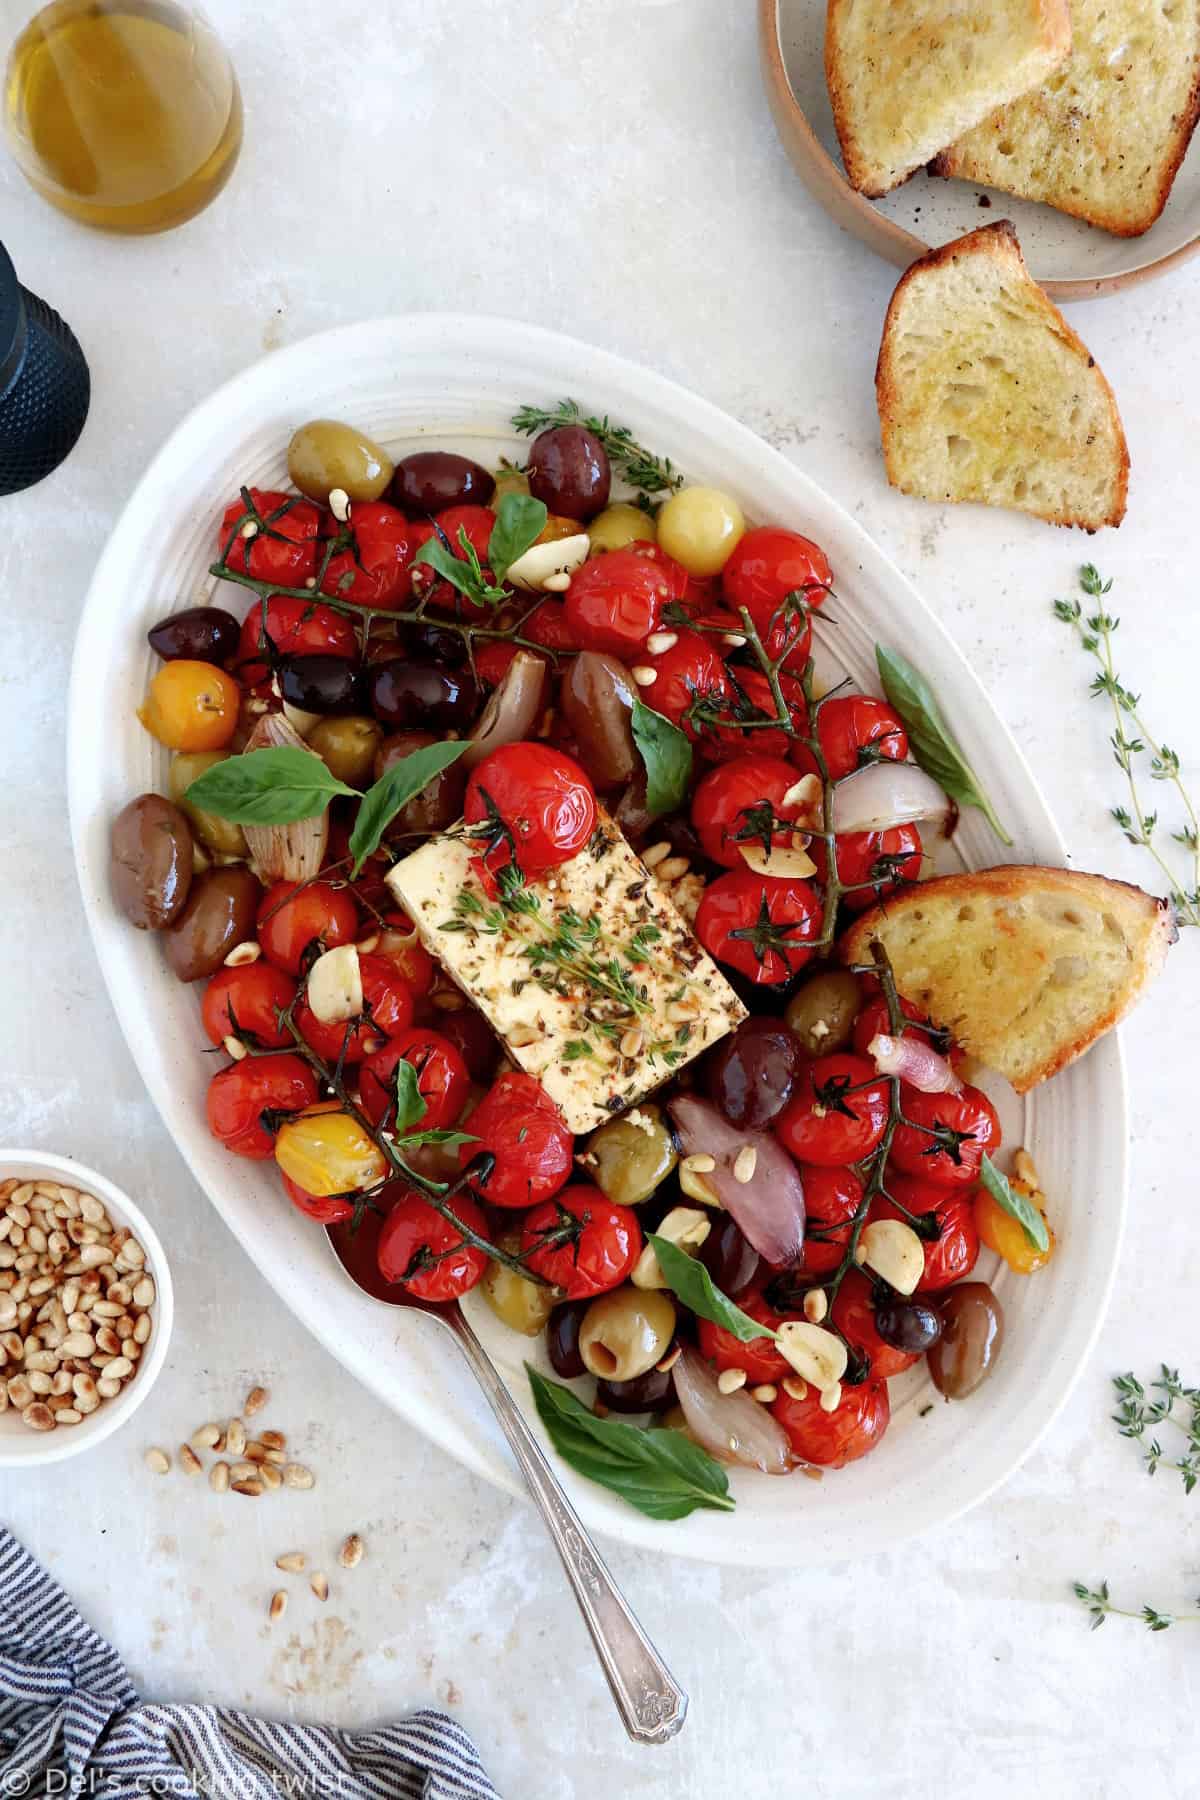 This baked feta with cherry tomatoes and olives, tossed with olive oil, herbs and various seasoning, is bursting with juicy and cheesy flavors.